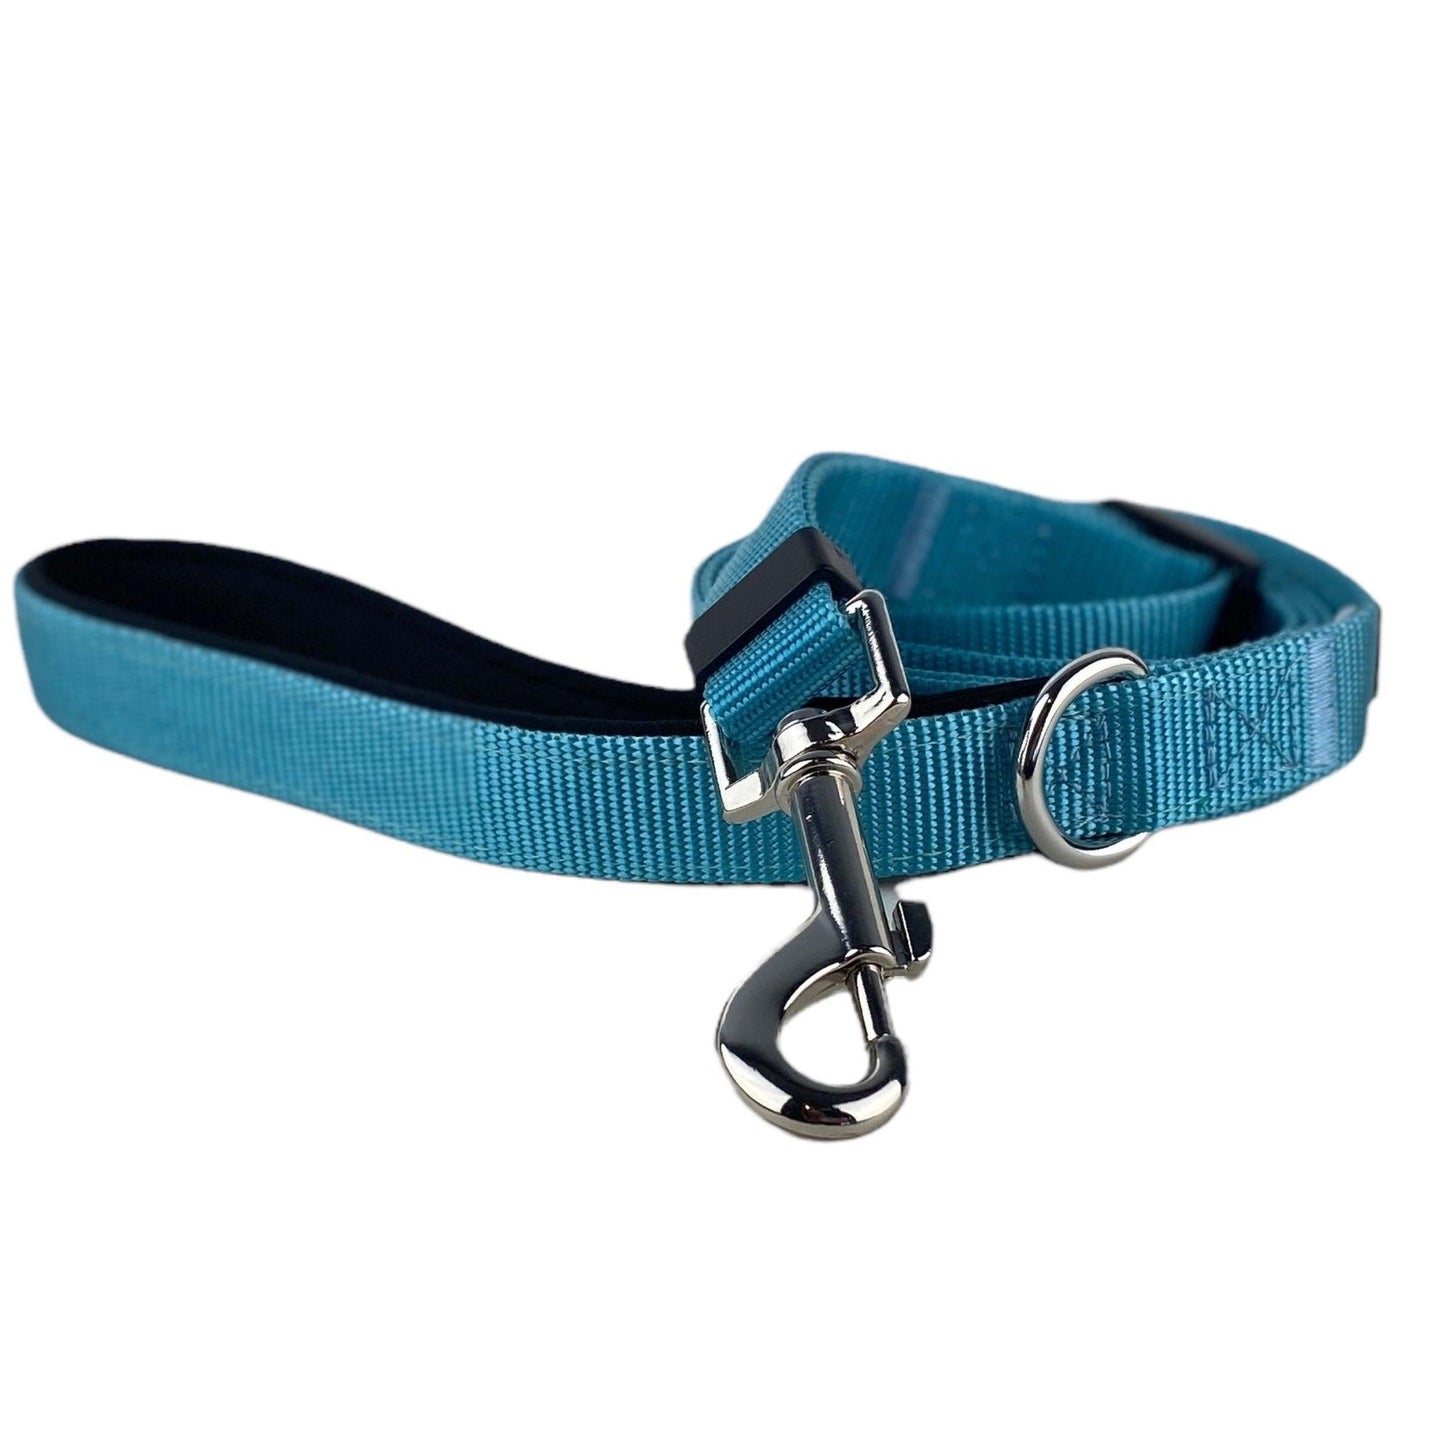 a photo of a bright blue dog leash that is adjustable and had a padded handle dog leash by fearless pet